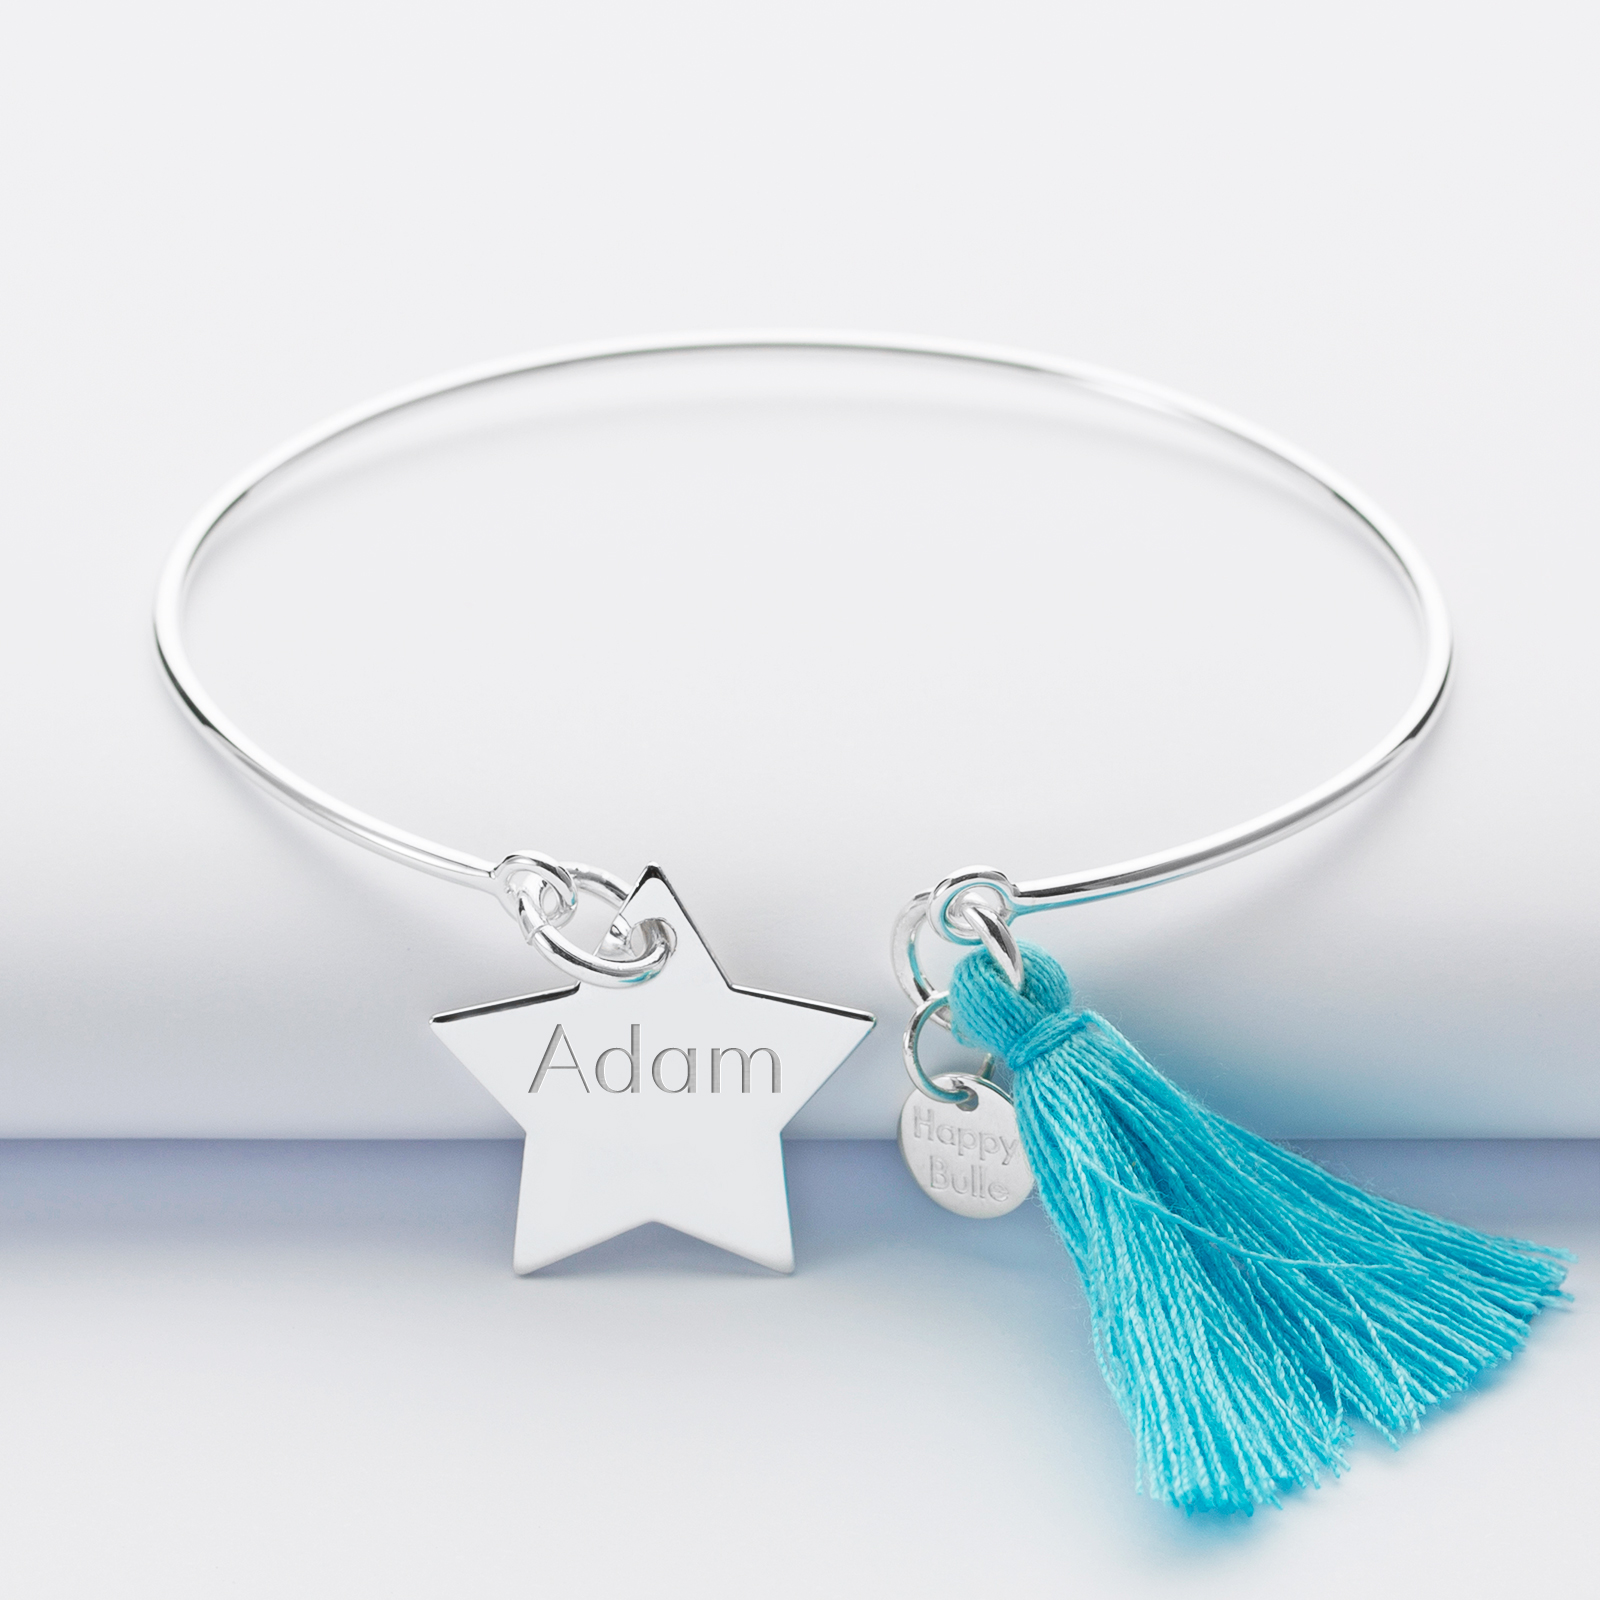 Personalised silver and tassel bangle bracelet and engraved star medallion 20x20 mm - name 1